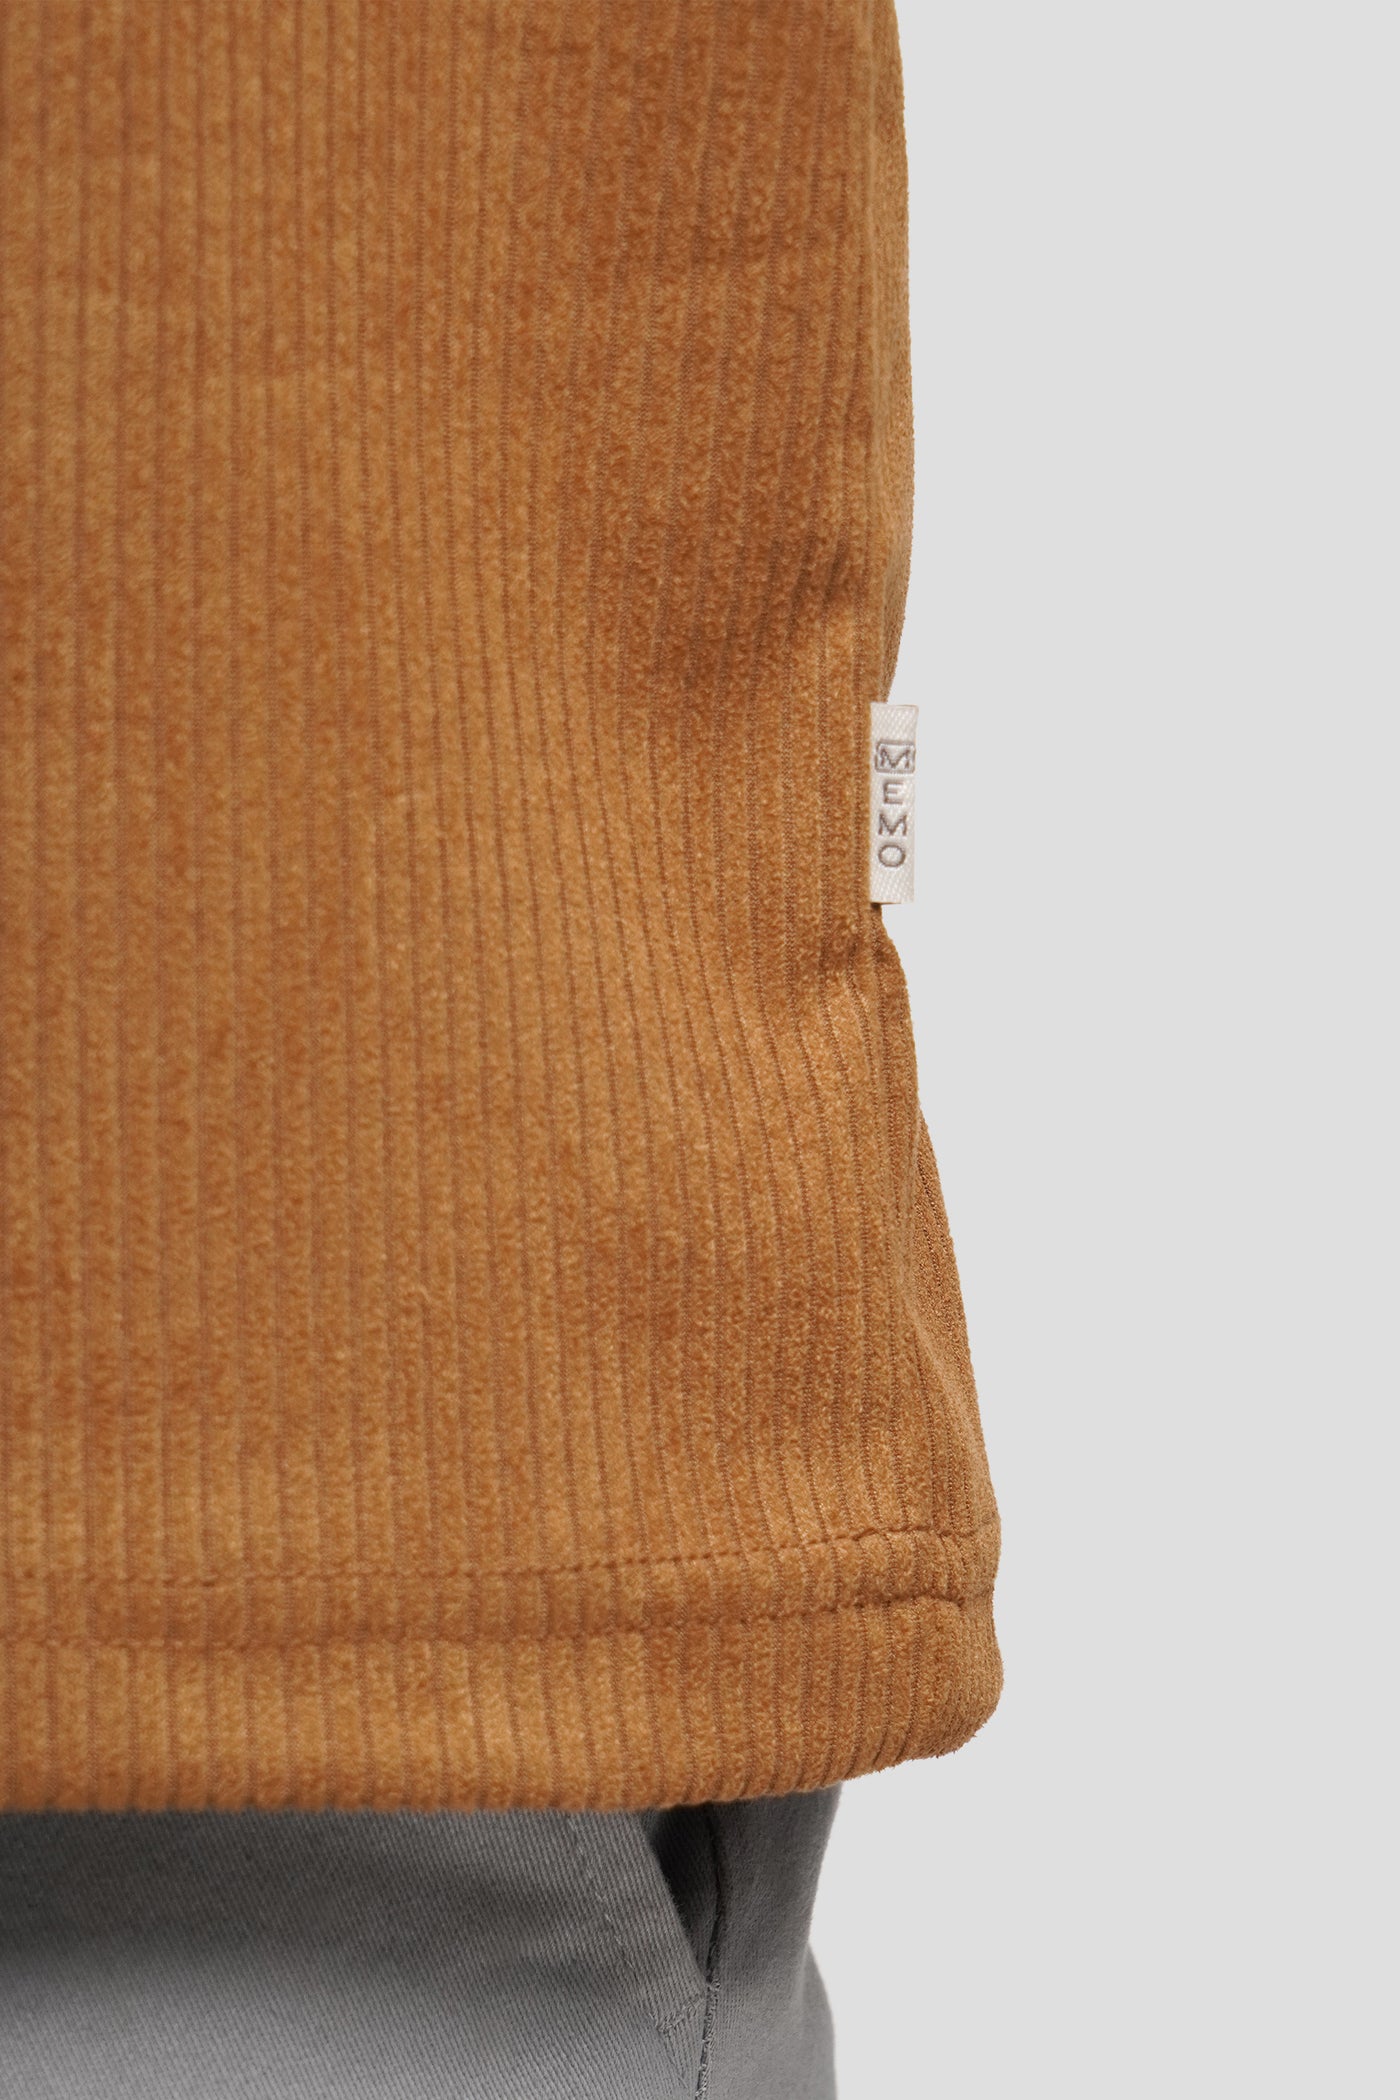 Textured Short Sleeve T-Shirt With Suede Finish